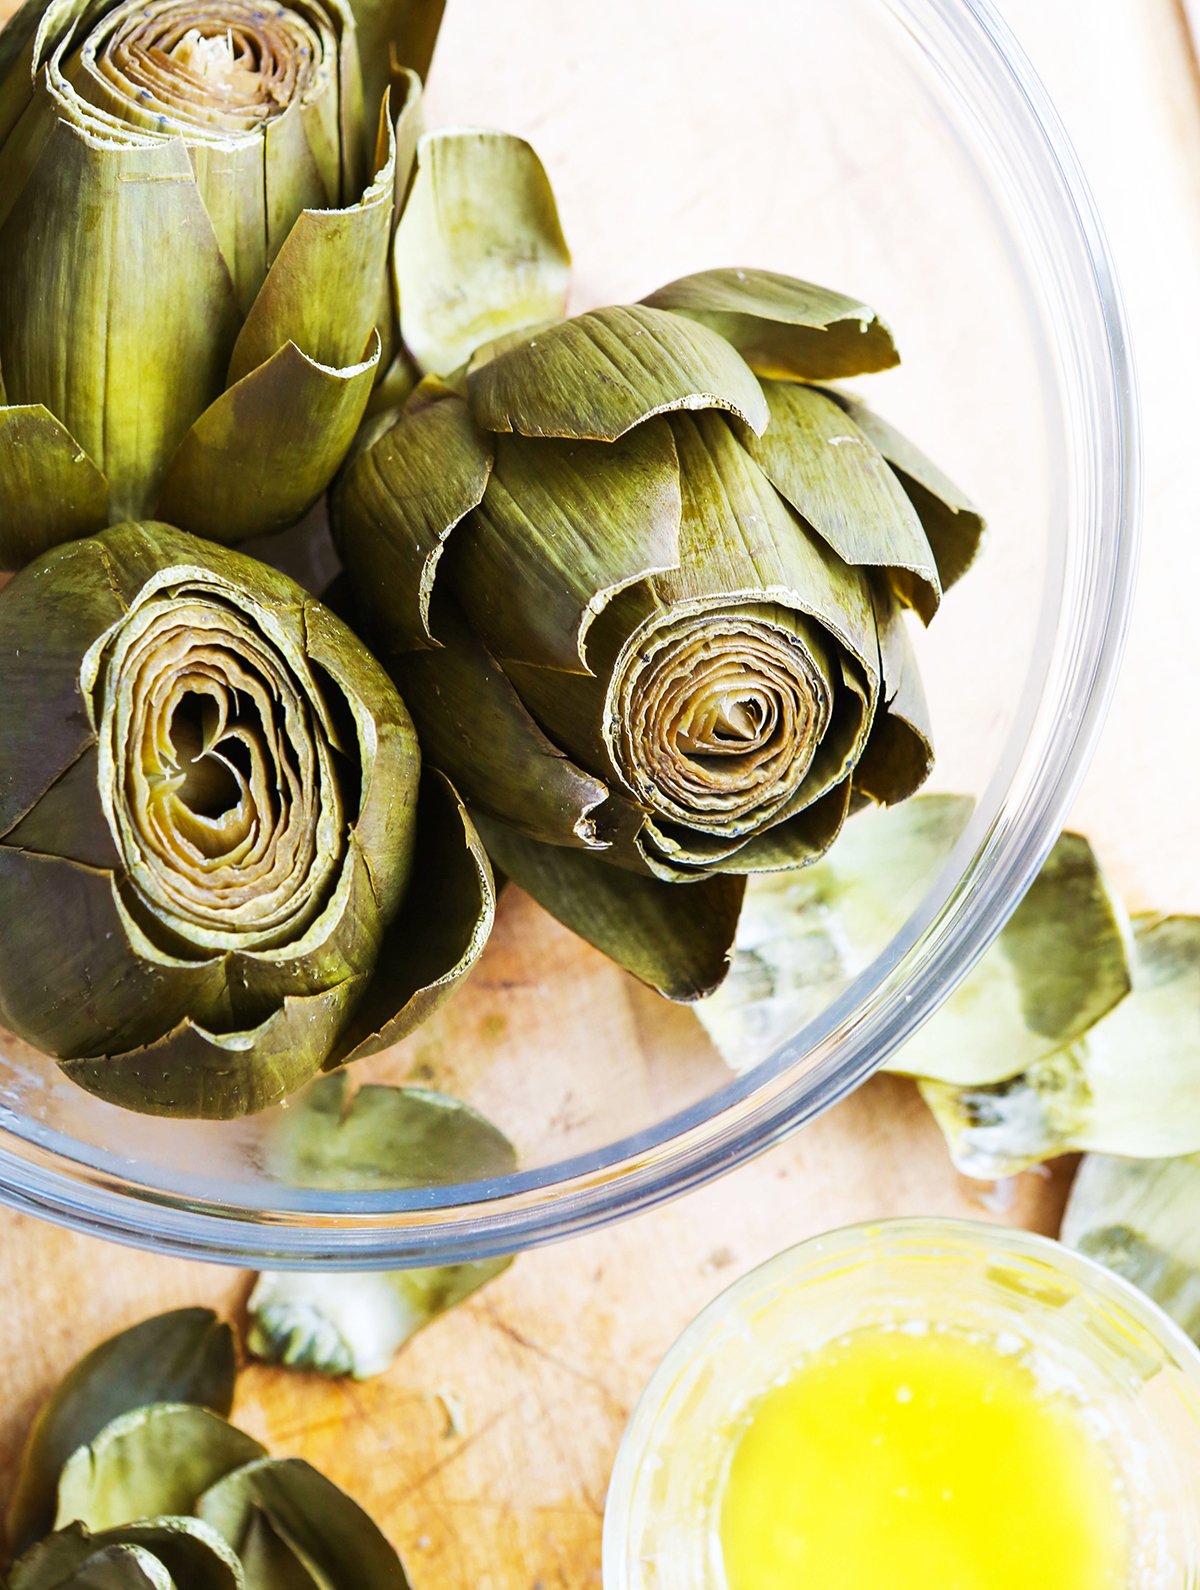 Bowl of cooked artichokes sitting next to a small bowl of melted butter.